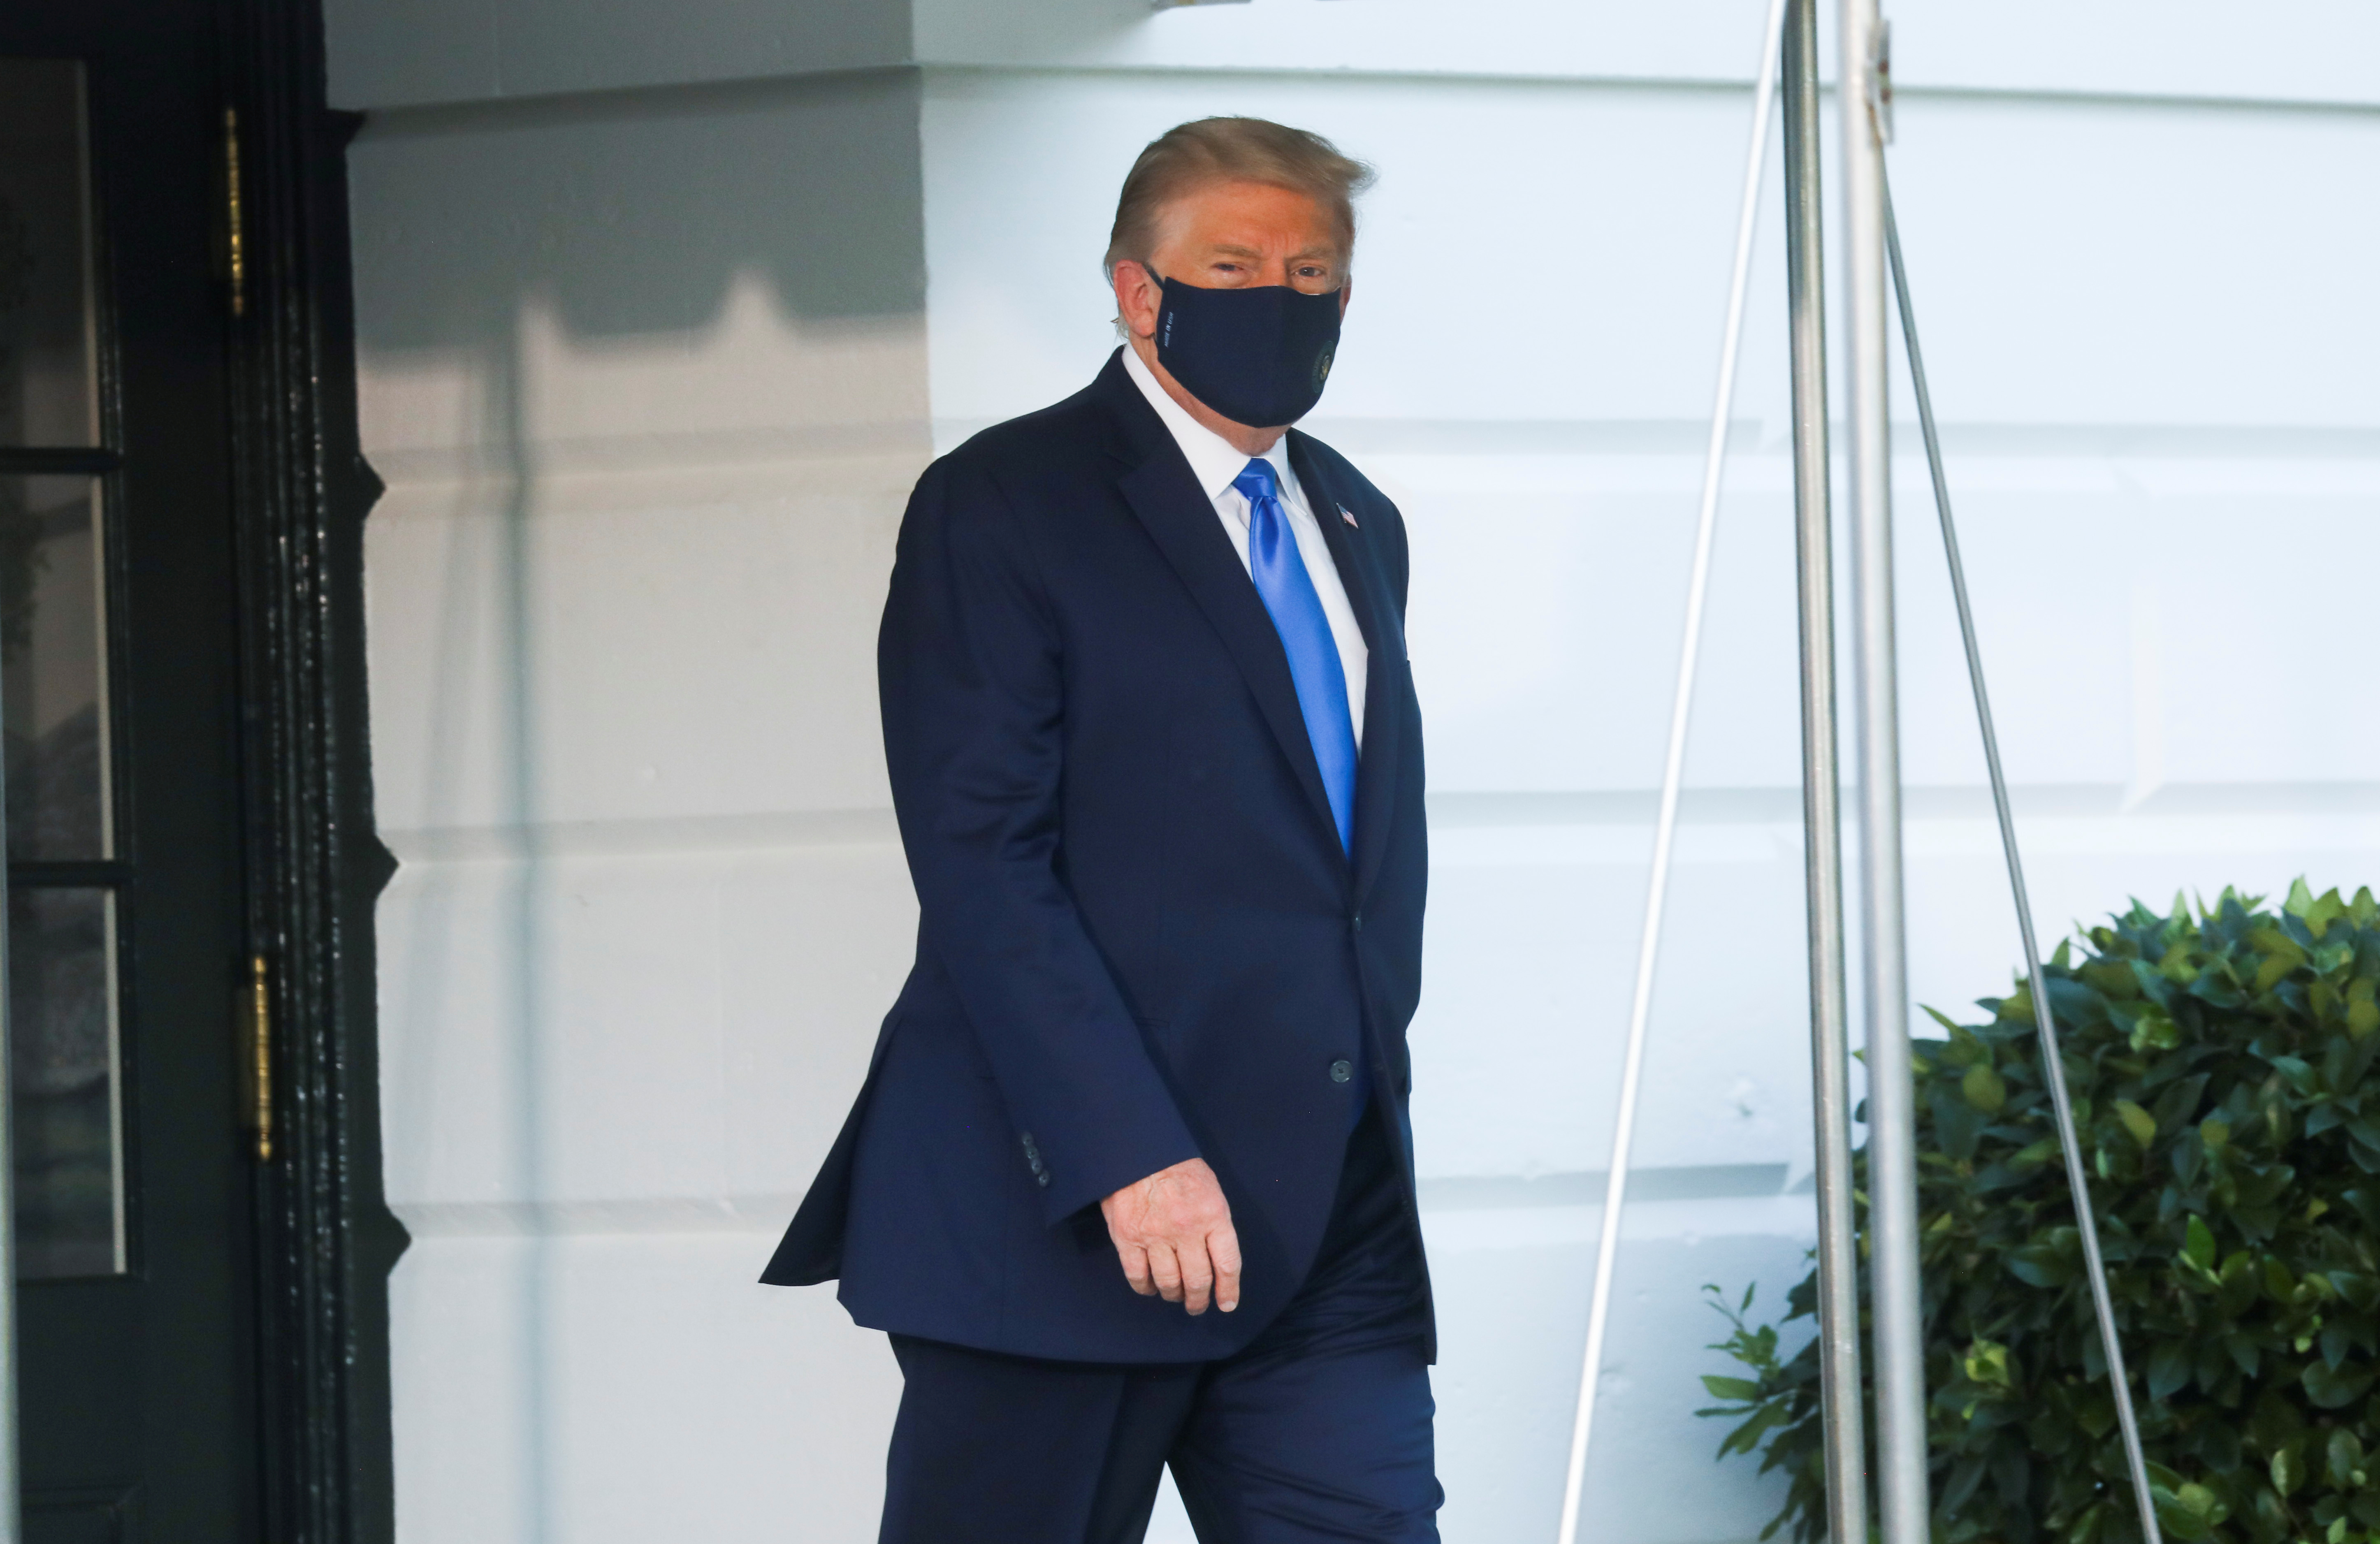 U.S. President Trump walks to the Marine One helicopter wearing a protective face mask as he departs the White House to fly to Walter Reed National Military Medical Center, where it was announced he will work for at least several days after testing positive for the coronavirus disease (COVID-19), on the South Lawn of the White House in Washington, U.S., October 2, 2020. REUTERS/Leah Millis